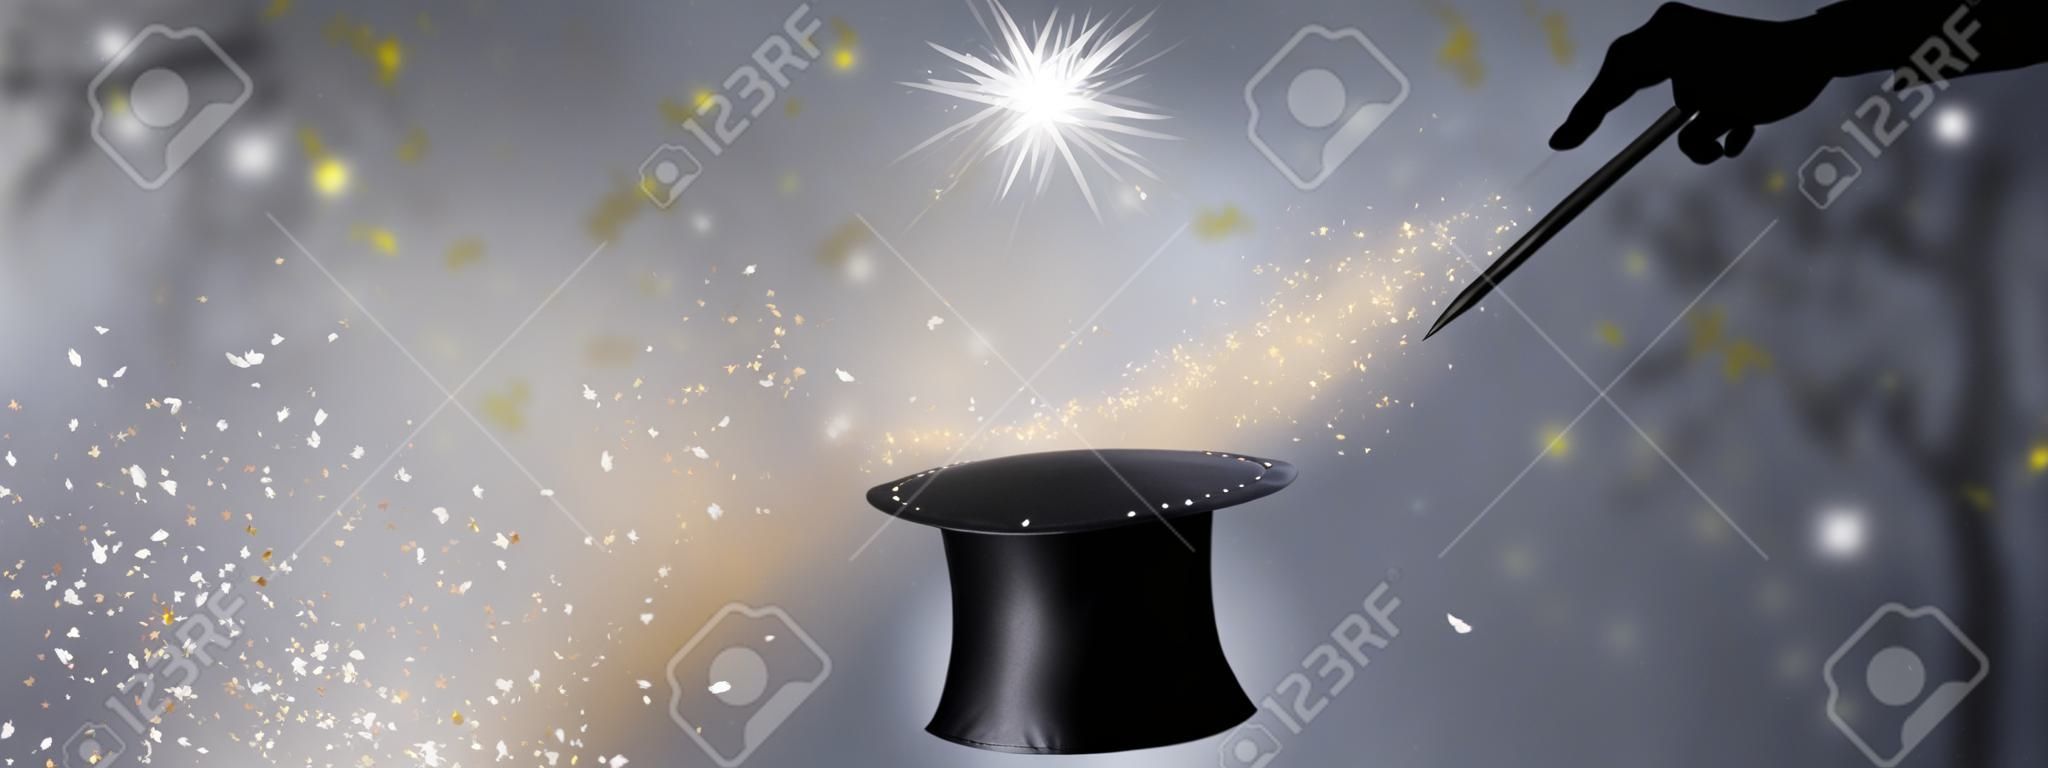 magician hands with black hat and wand